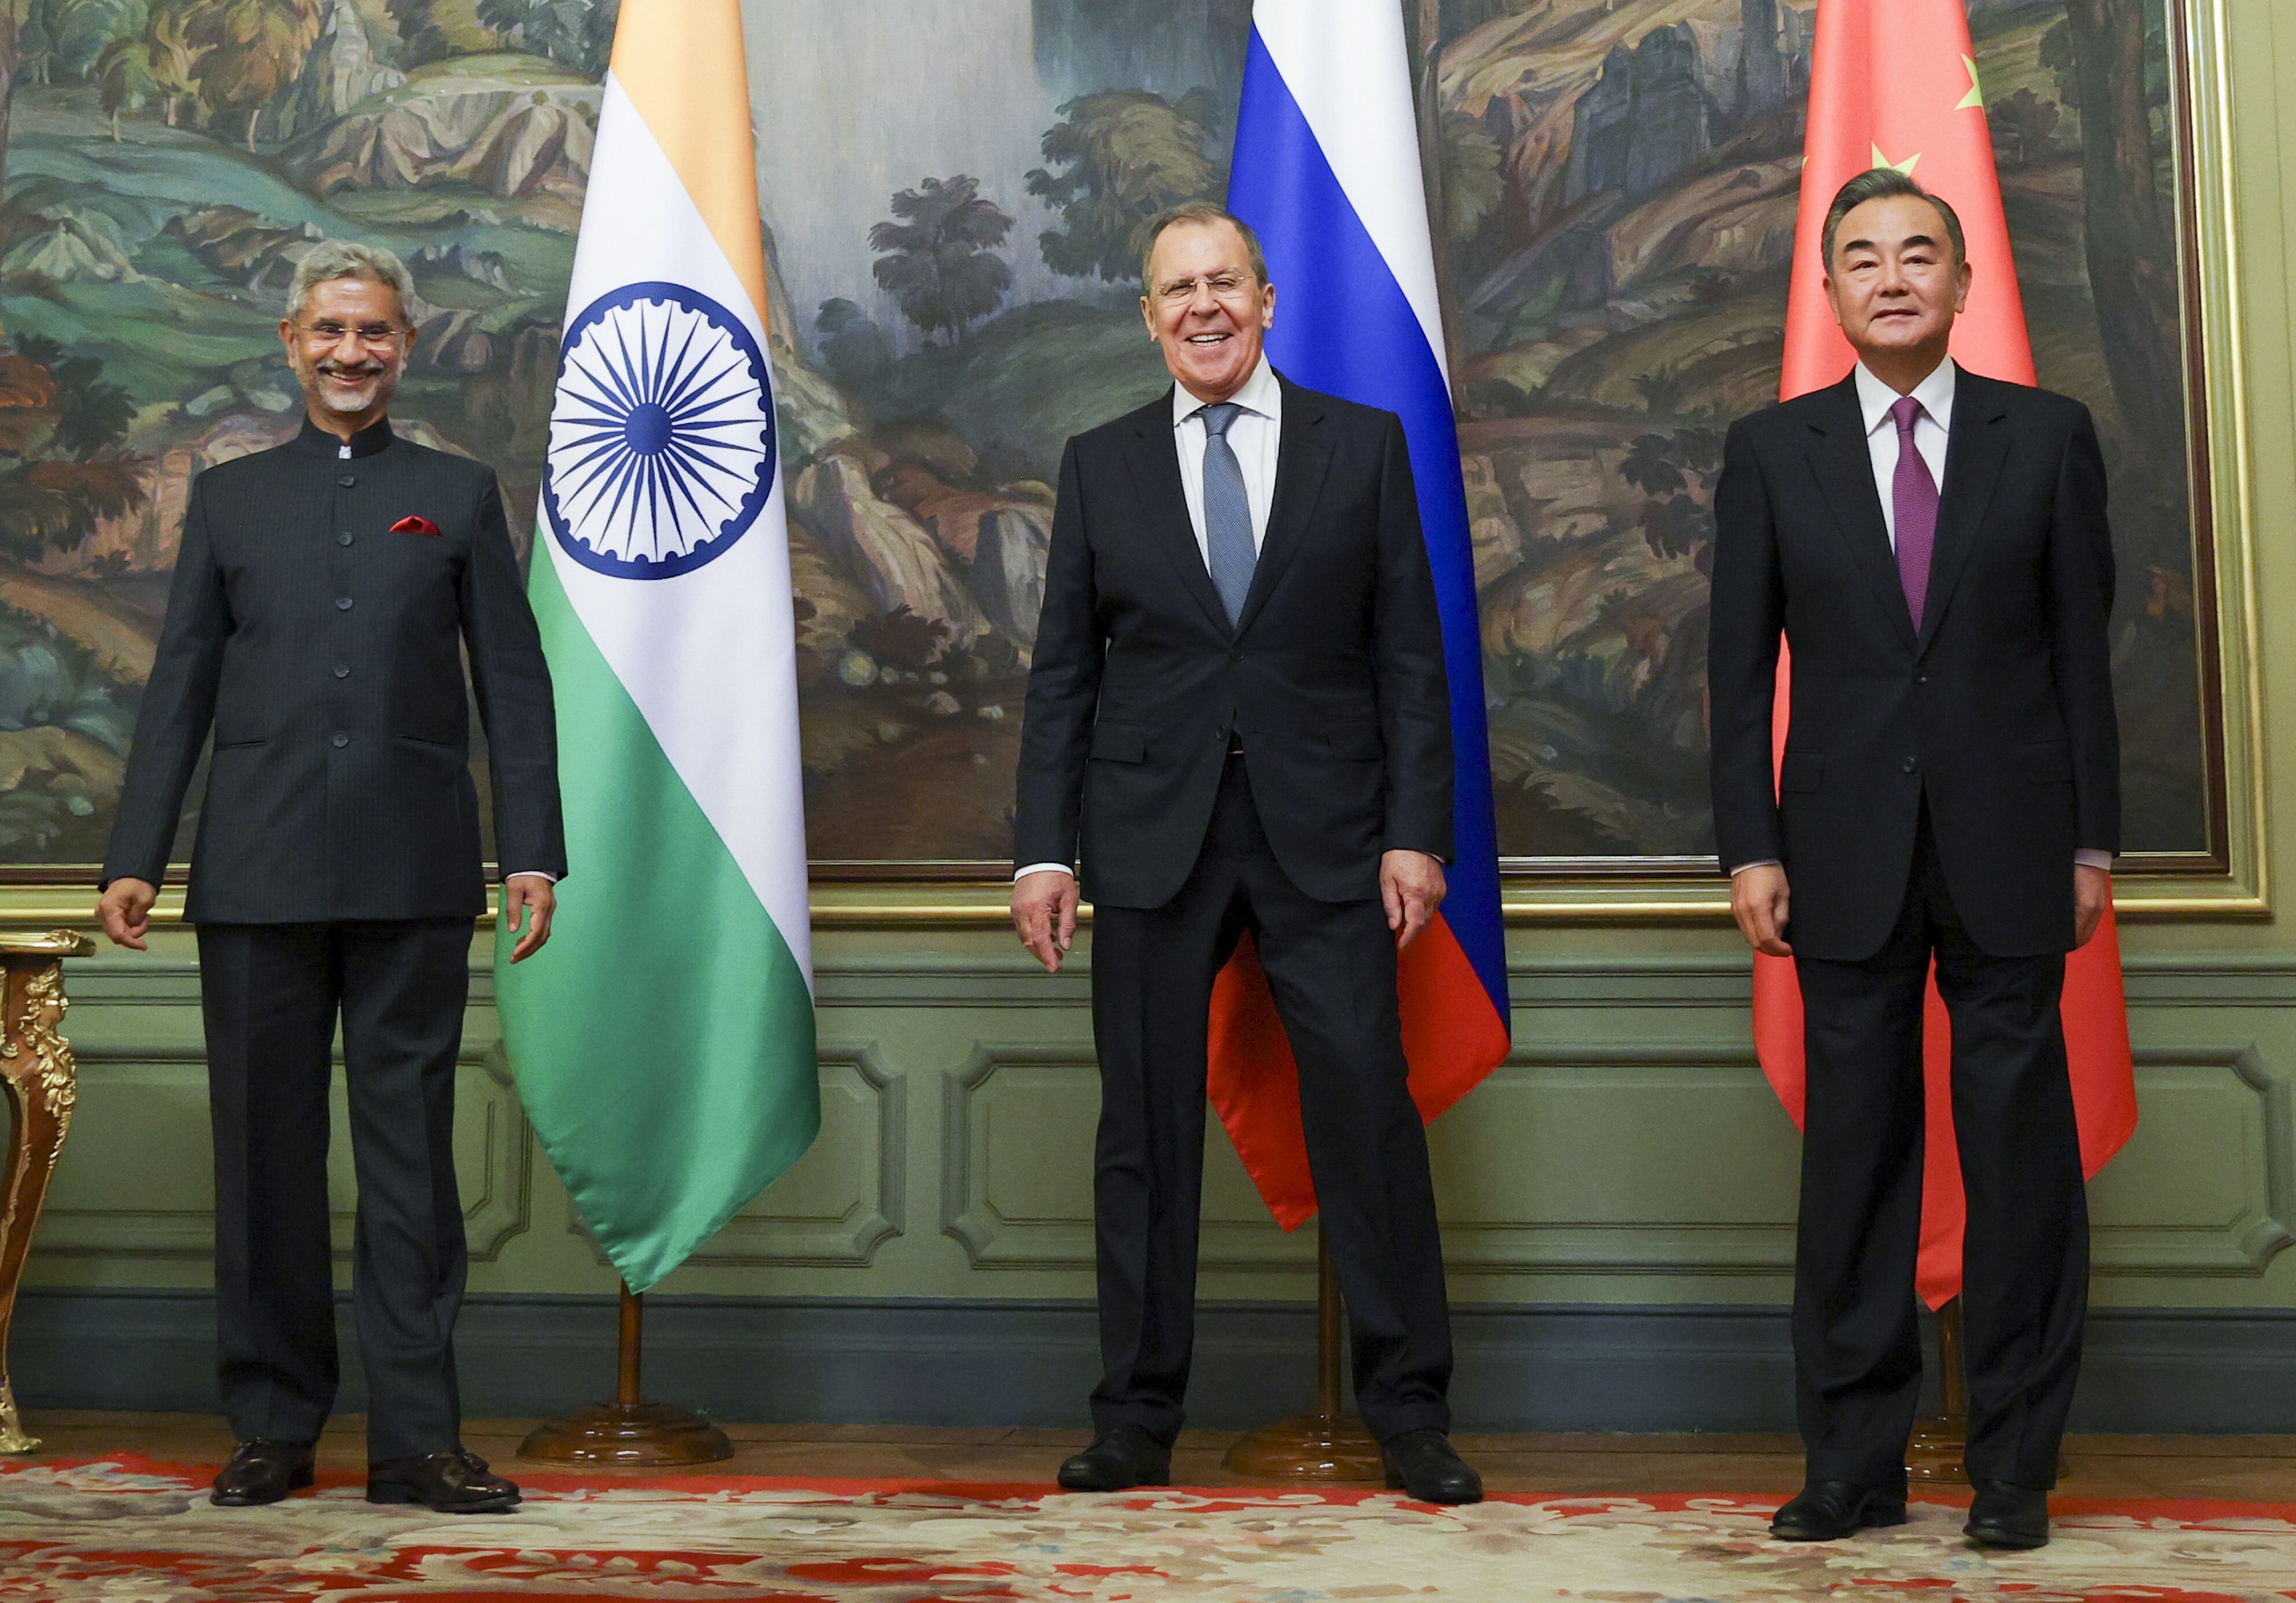 India’s Foreign Minister S. Jaishankar (from left), Russia’s Foreign Minister Sergey Lavrov and China’s Foreign Minister Wang Yi at a Shanghai Cooperation Organisation summit in Moscow on September 10. Photo: Russian Foreign Ministry Press Service via AP